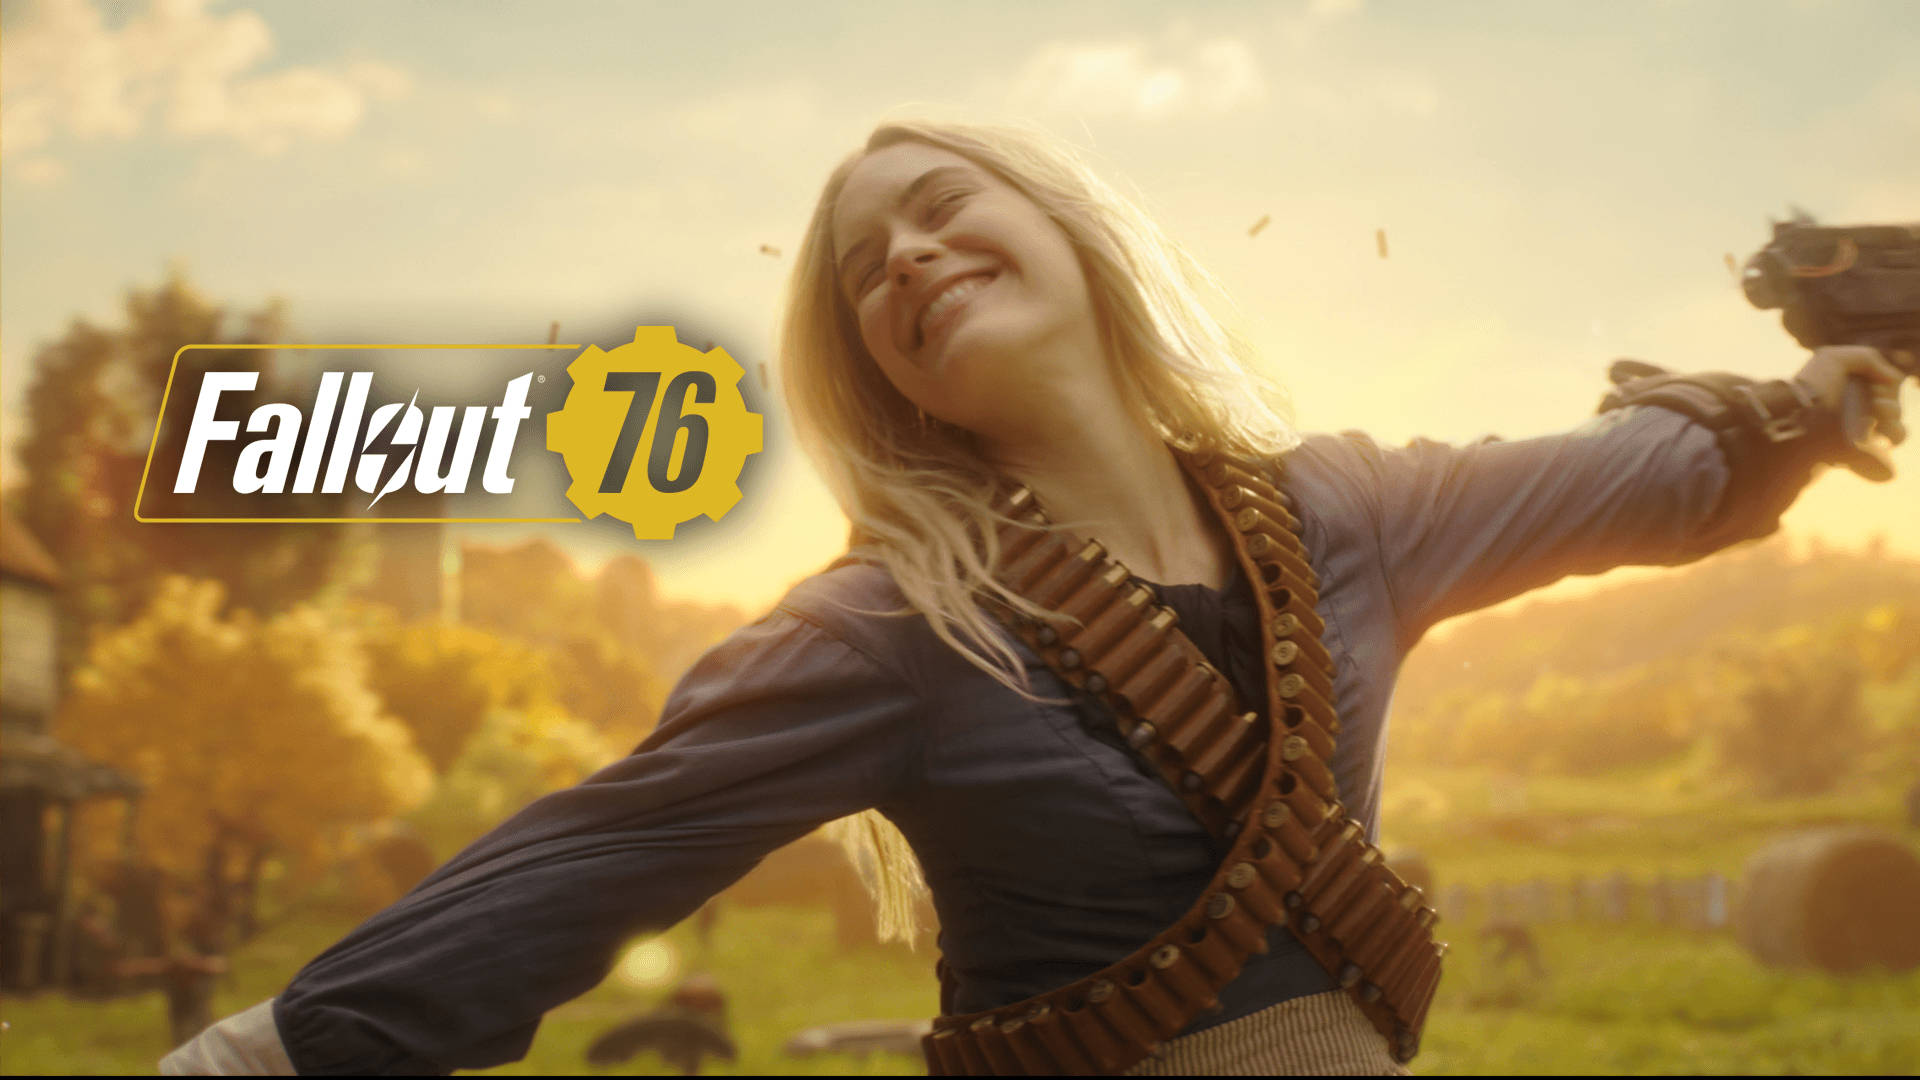 Fallout 76 Happy Woman Game Poster Background